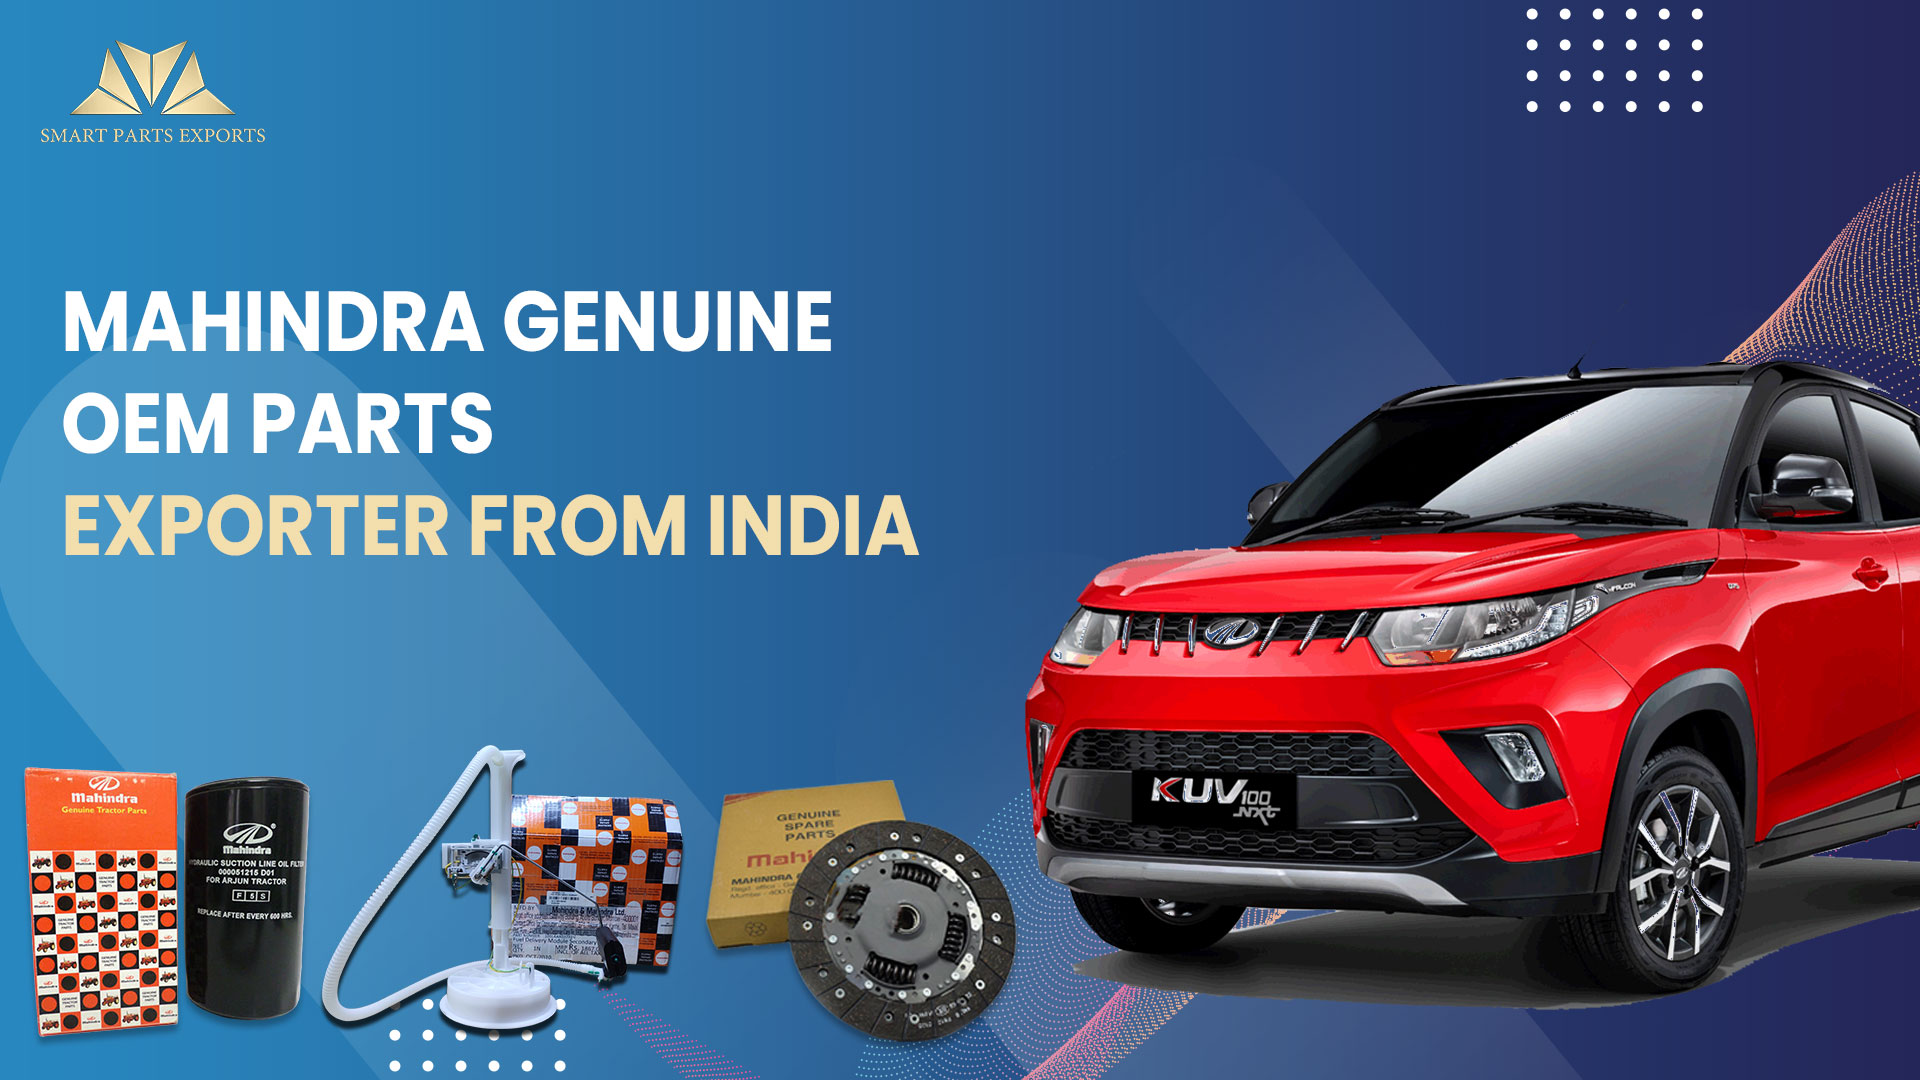 Mahindra Genuine OEM Parts Exporter from India